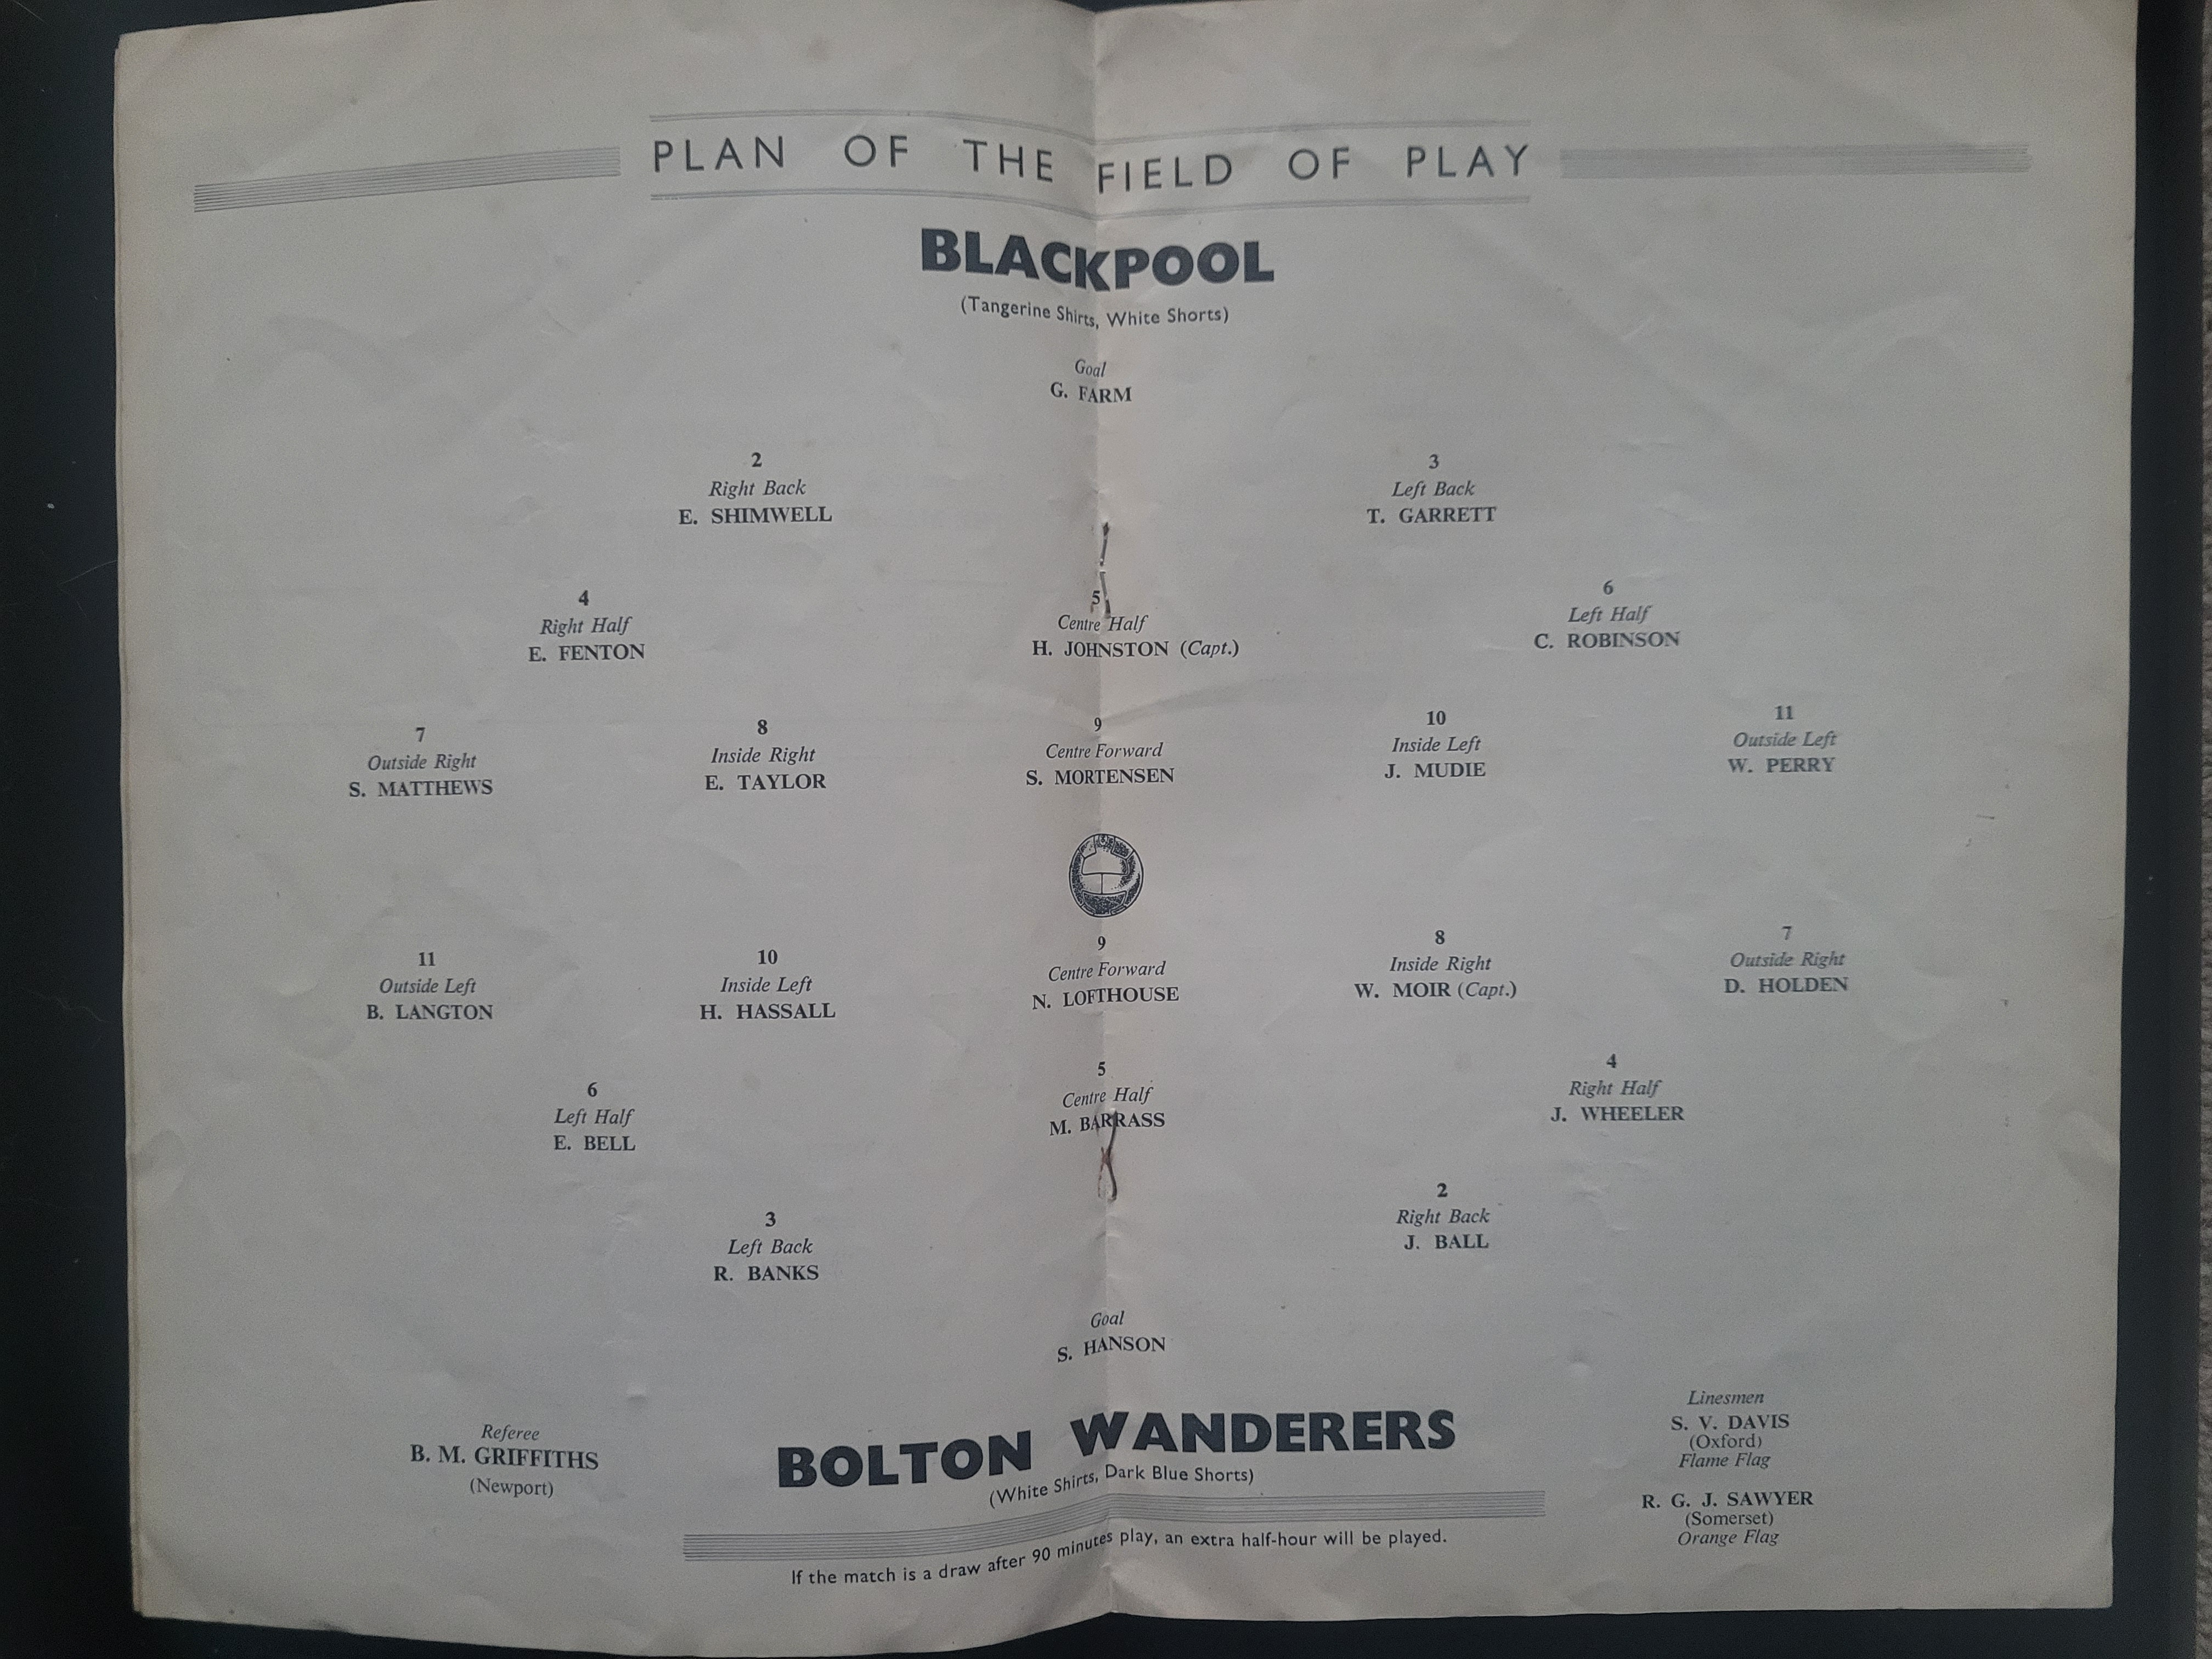 1953 FA CUP FINAL BLACKPOOL V BOLTON WANDERERS PROGRAMME, TICKET & SOUVENIR - Image 5 of 5